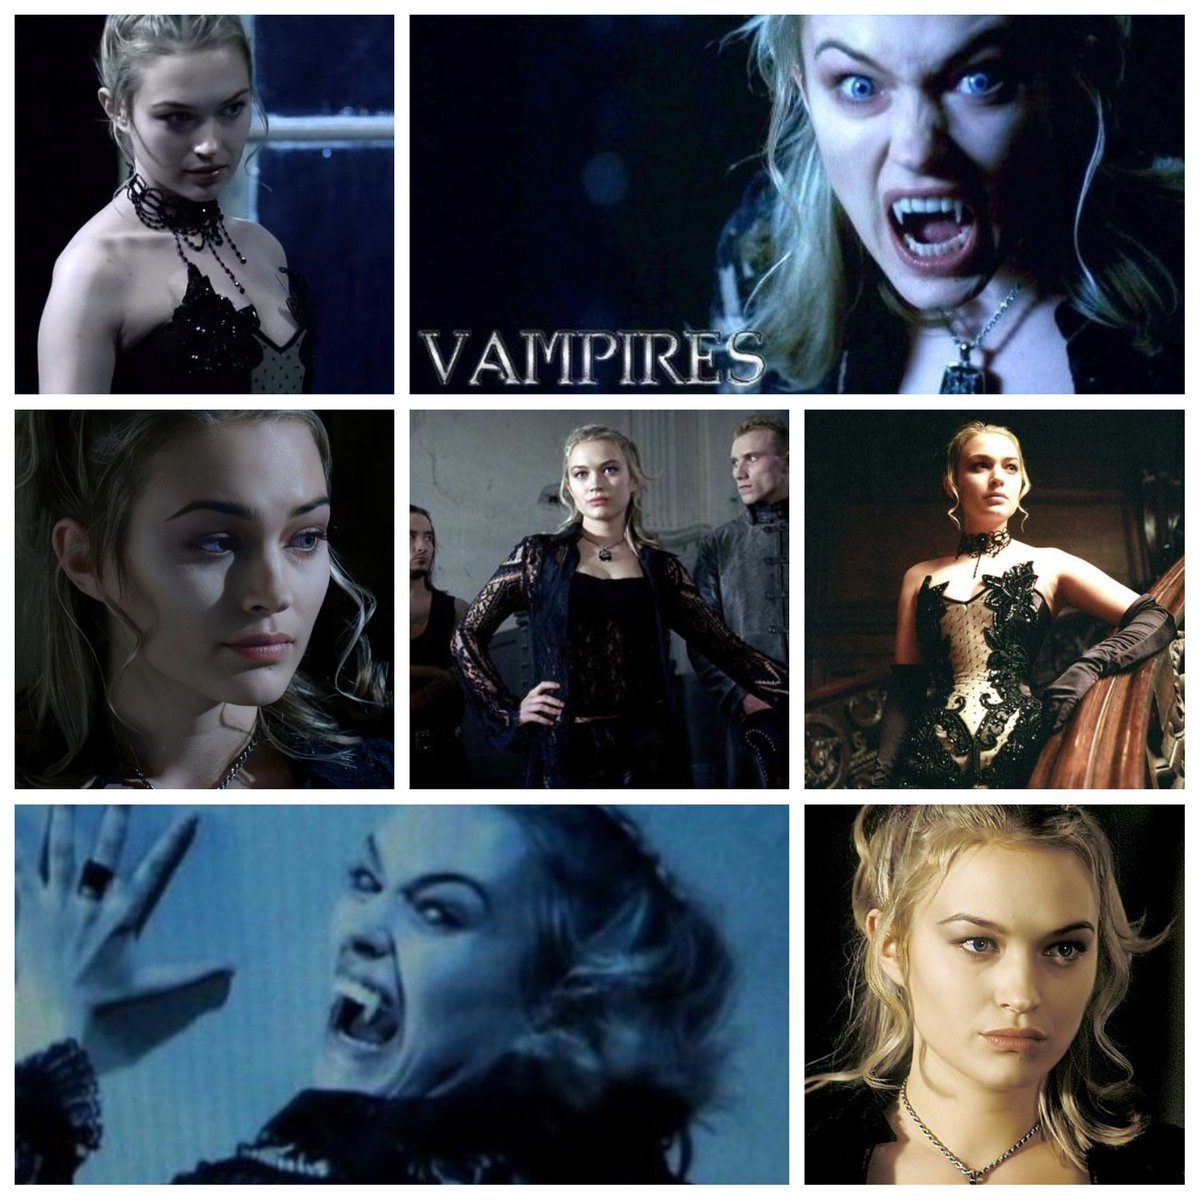 Who's your favourite vampire? @SophiaMyles as Erika in Underworld 😍. Not only was she a total badass, but she had incredible style, too 👌. It's truly a shame they didn't utilize her character more within the series.